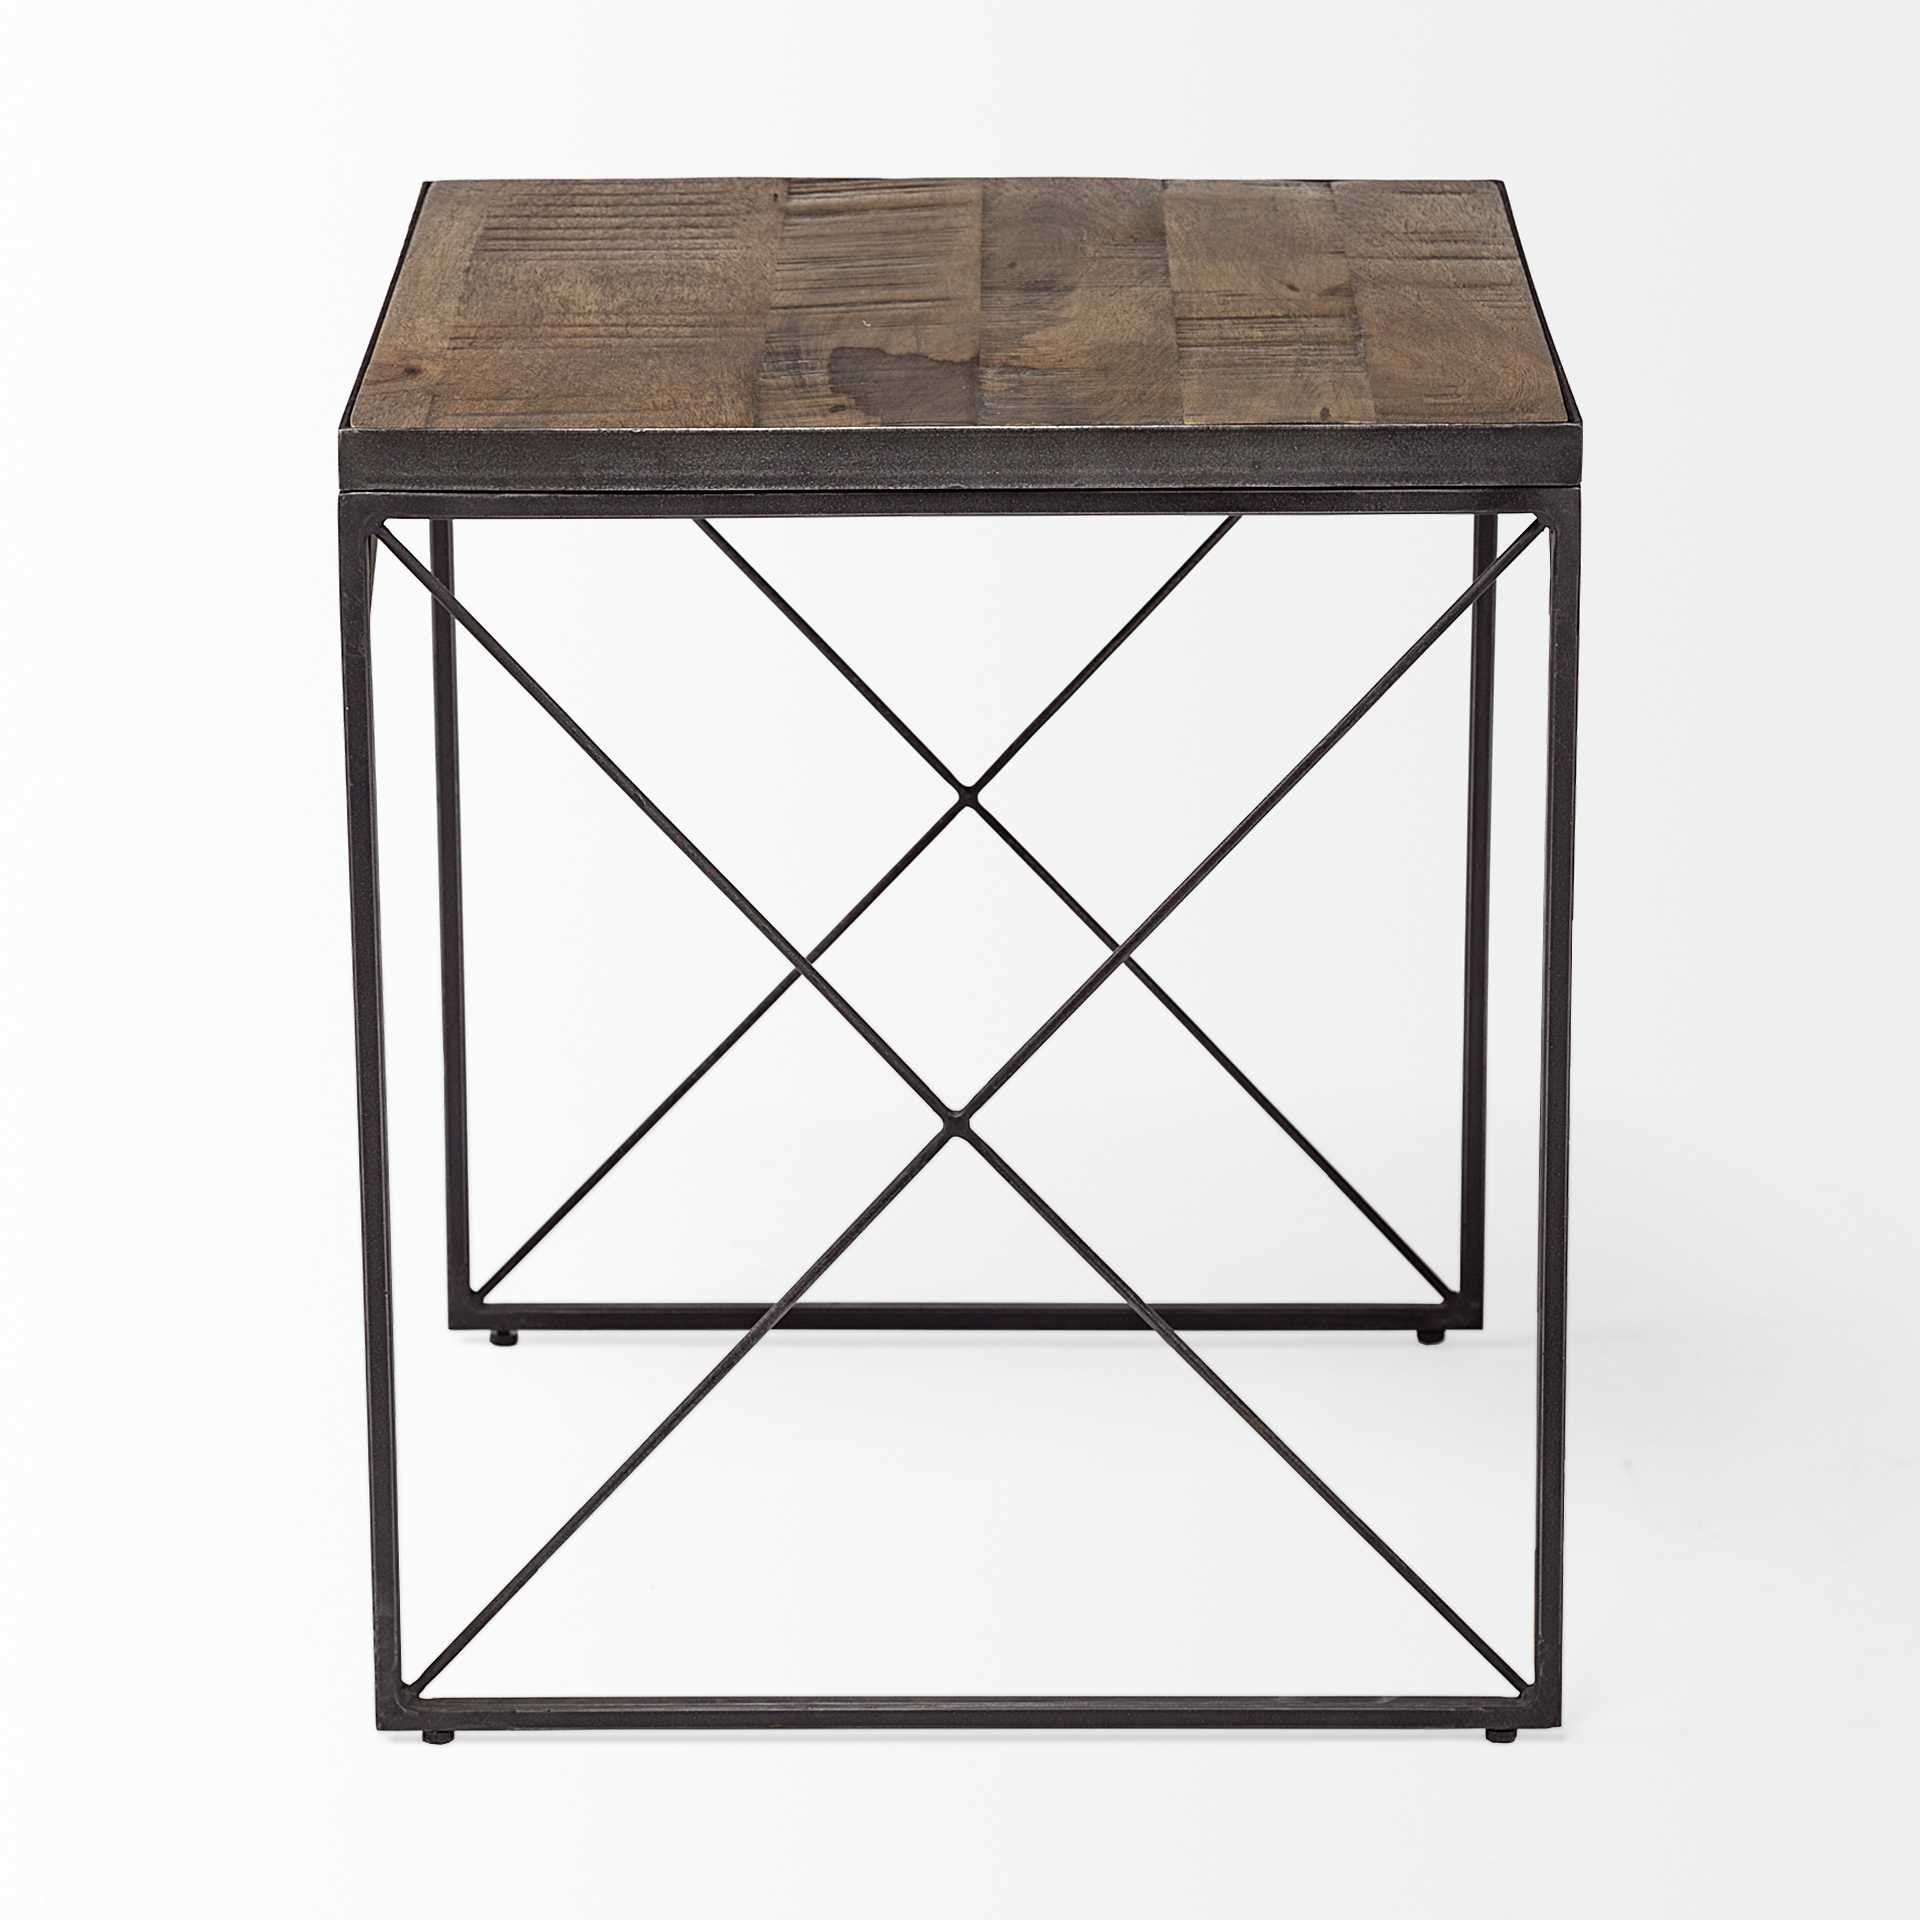 23" Brown Solid Wood Square End Table